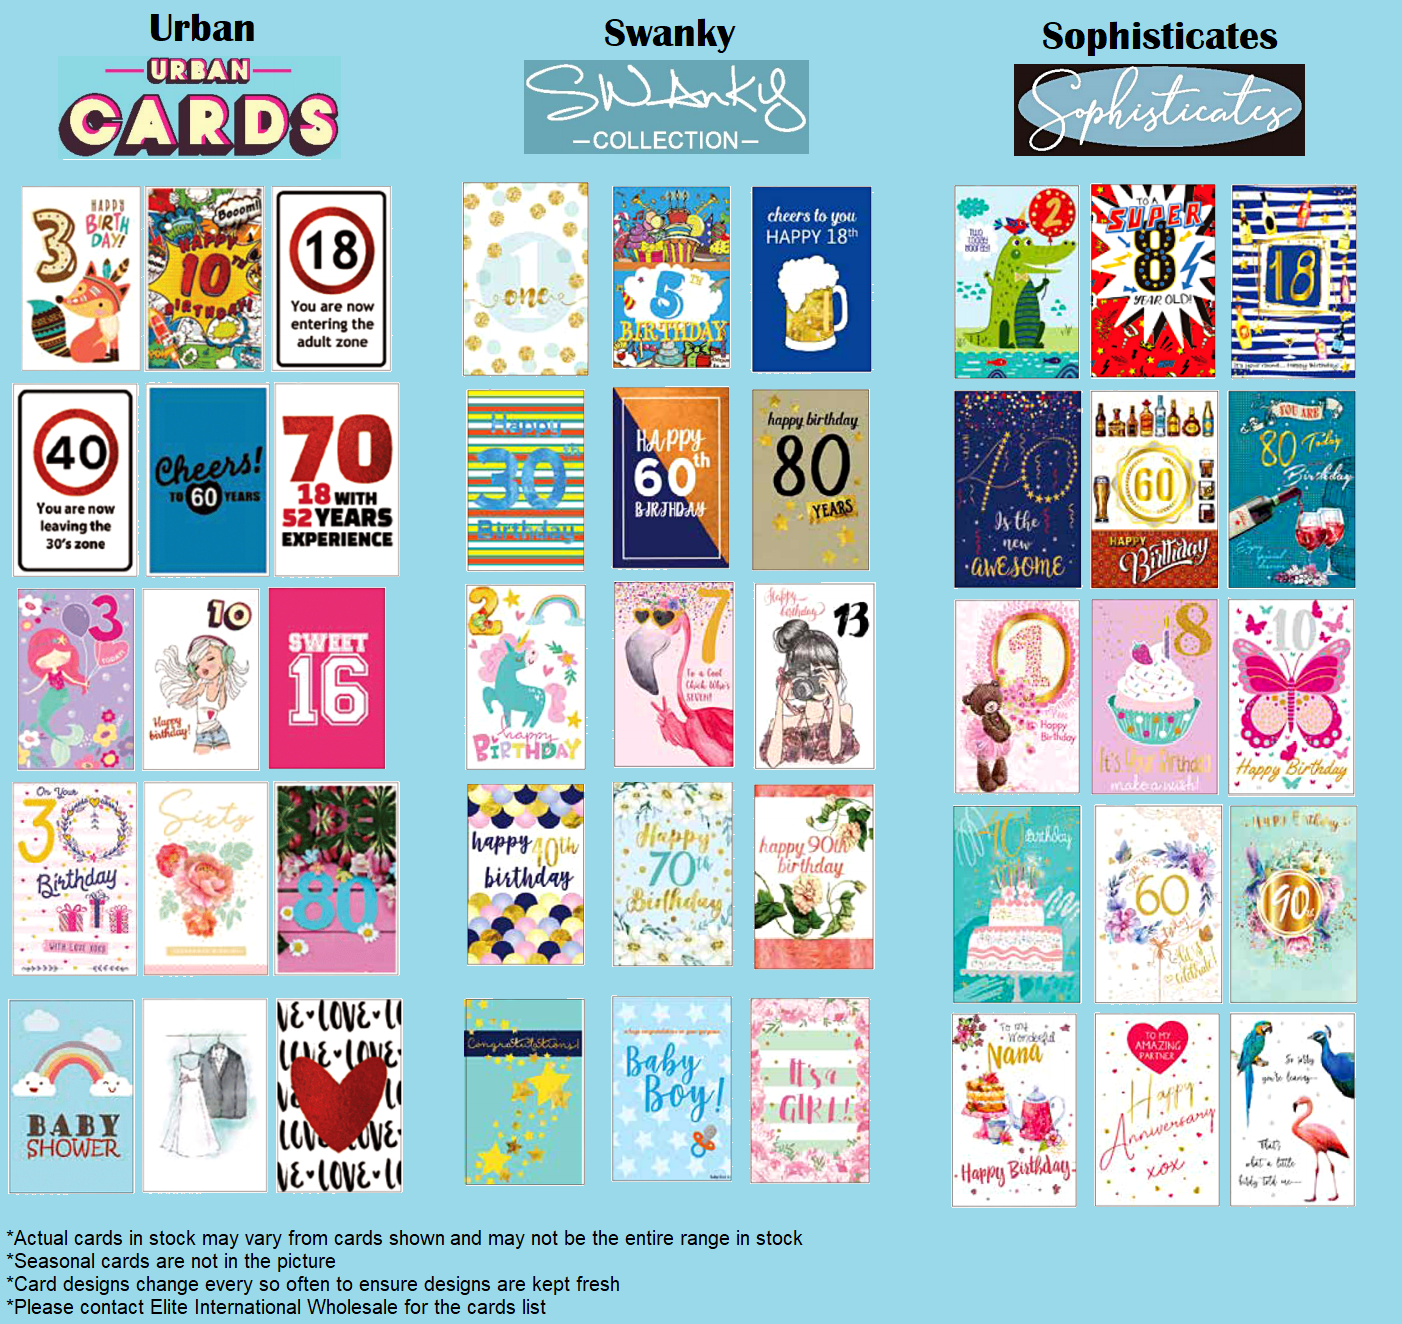 Snazzle greeting/gift card psuedo examples